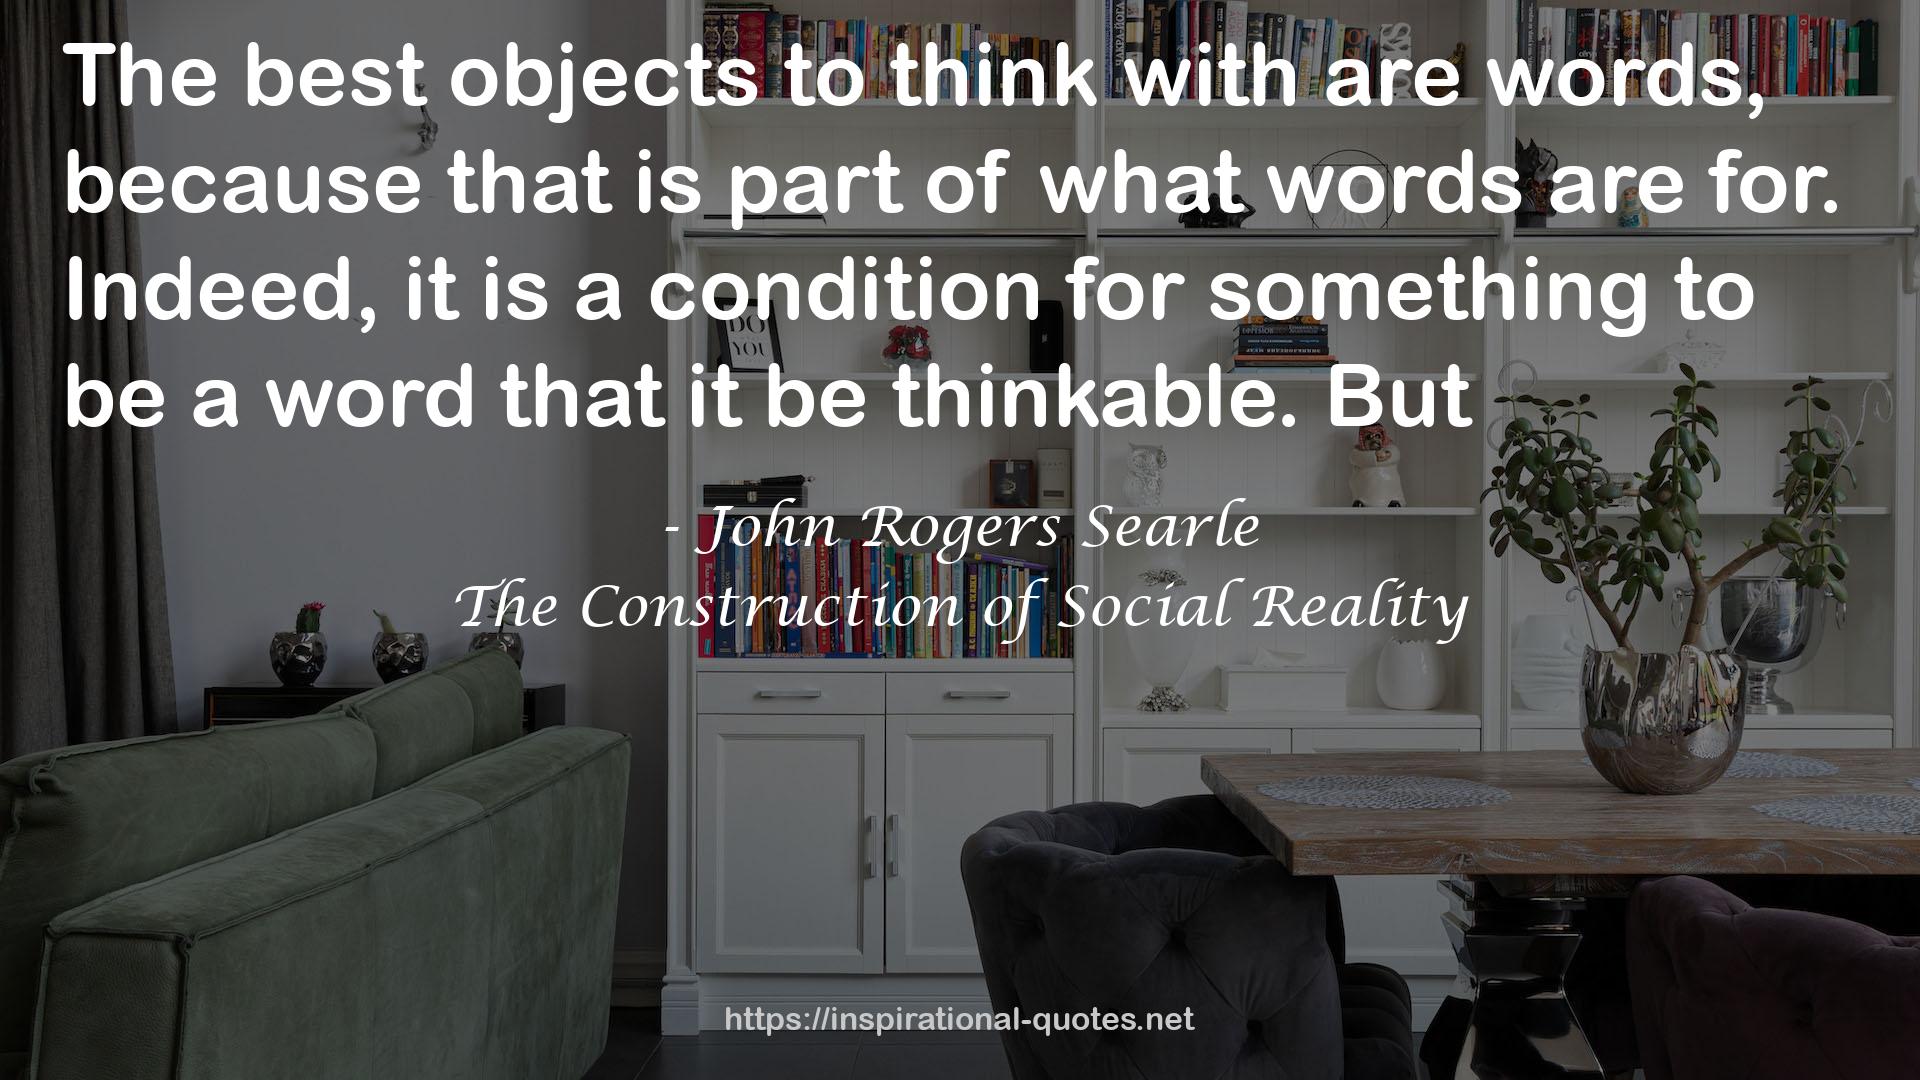 The Construction of Social Reality QUOTES